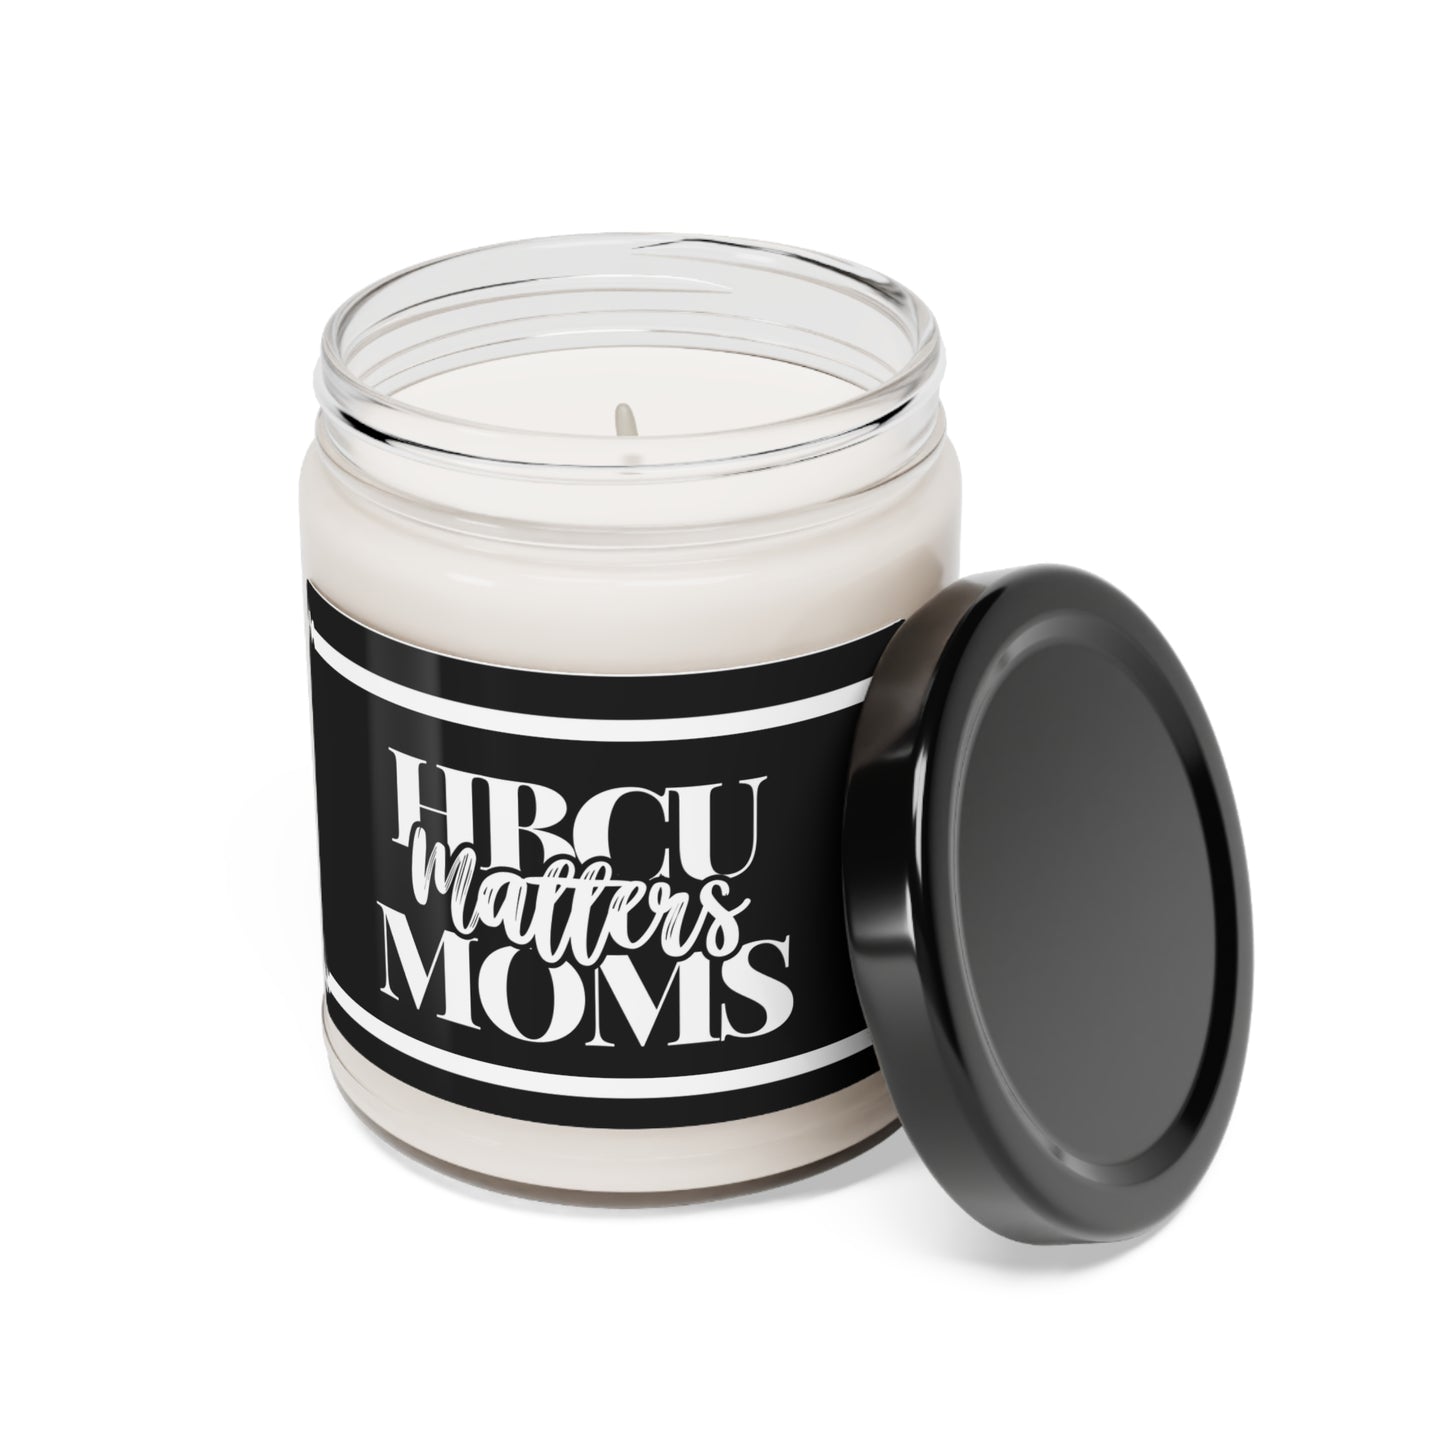 HBCU Moms Matter Scented Soy Candle, 9oz